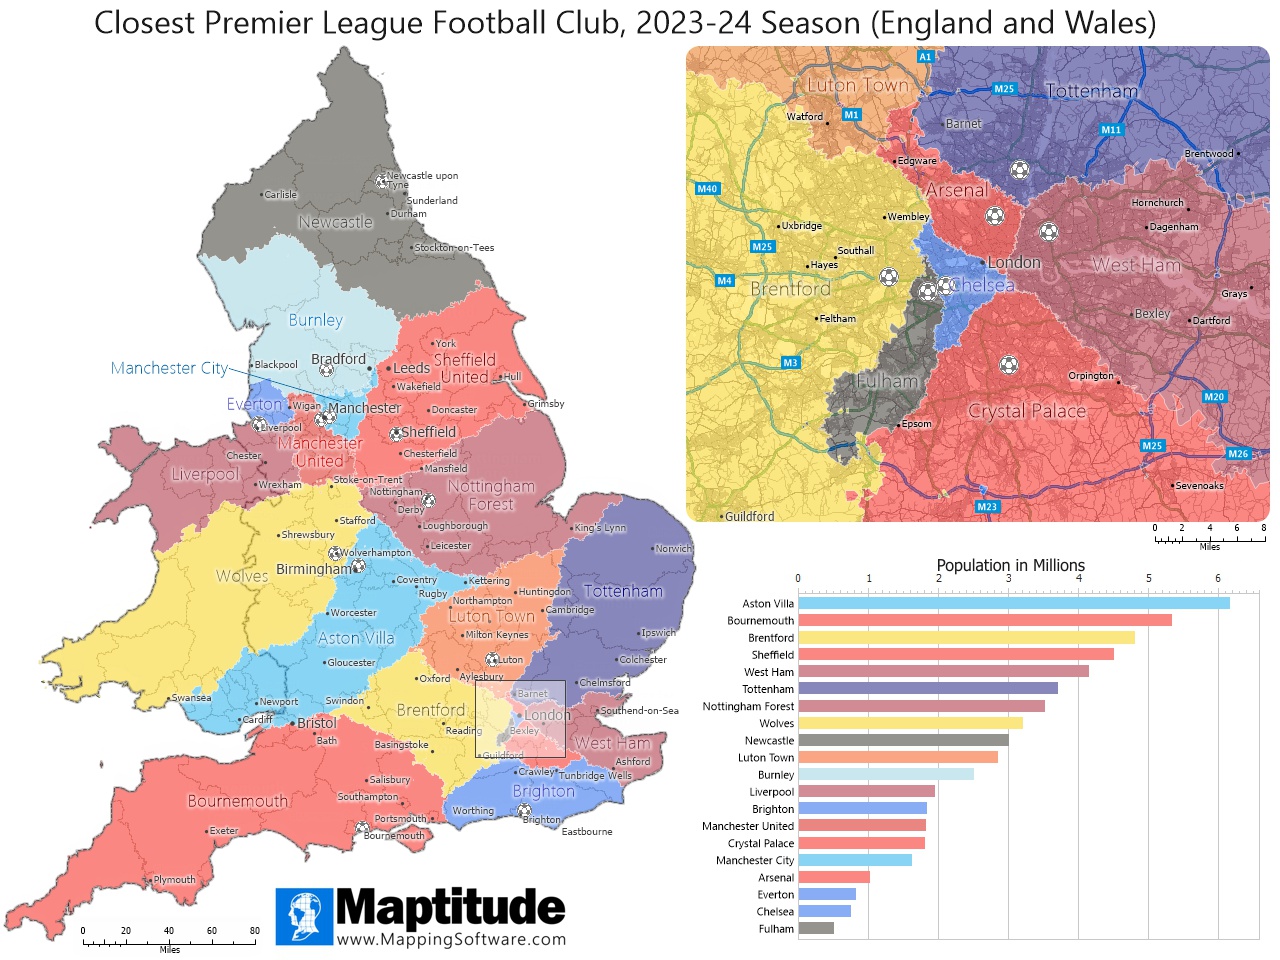 Maptitude mapping software infographic of Closest Premier League Football Club